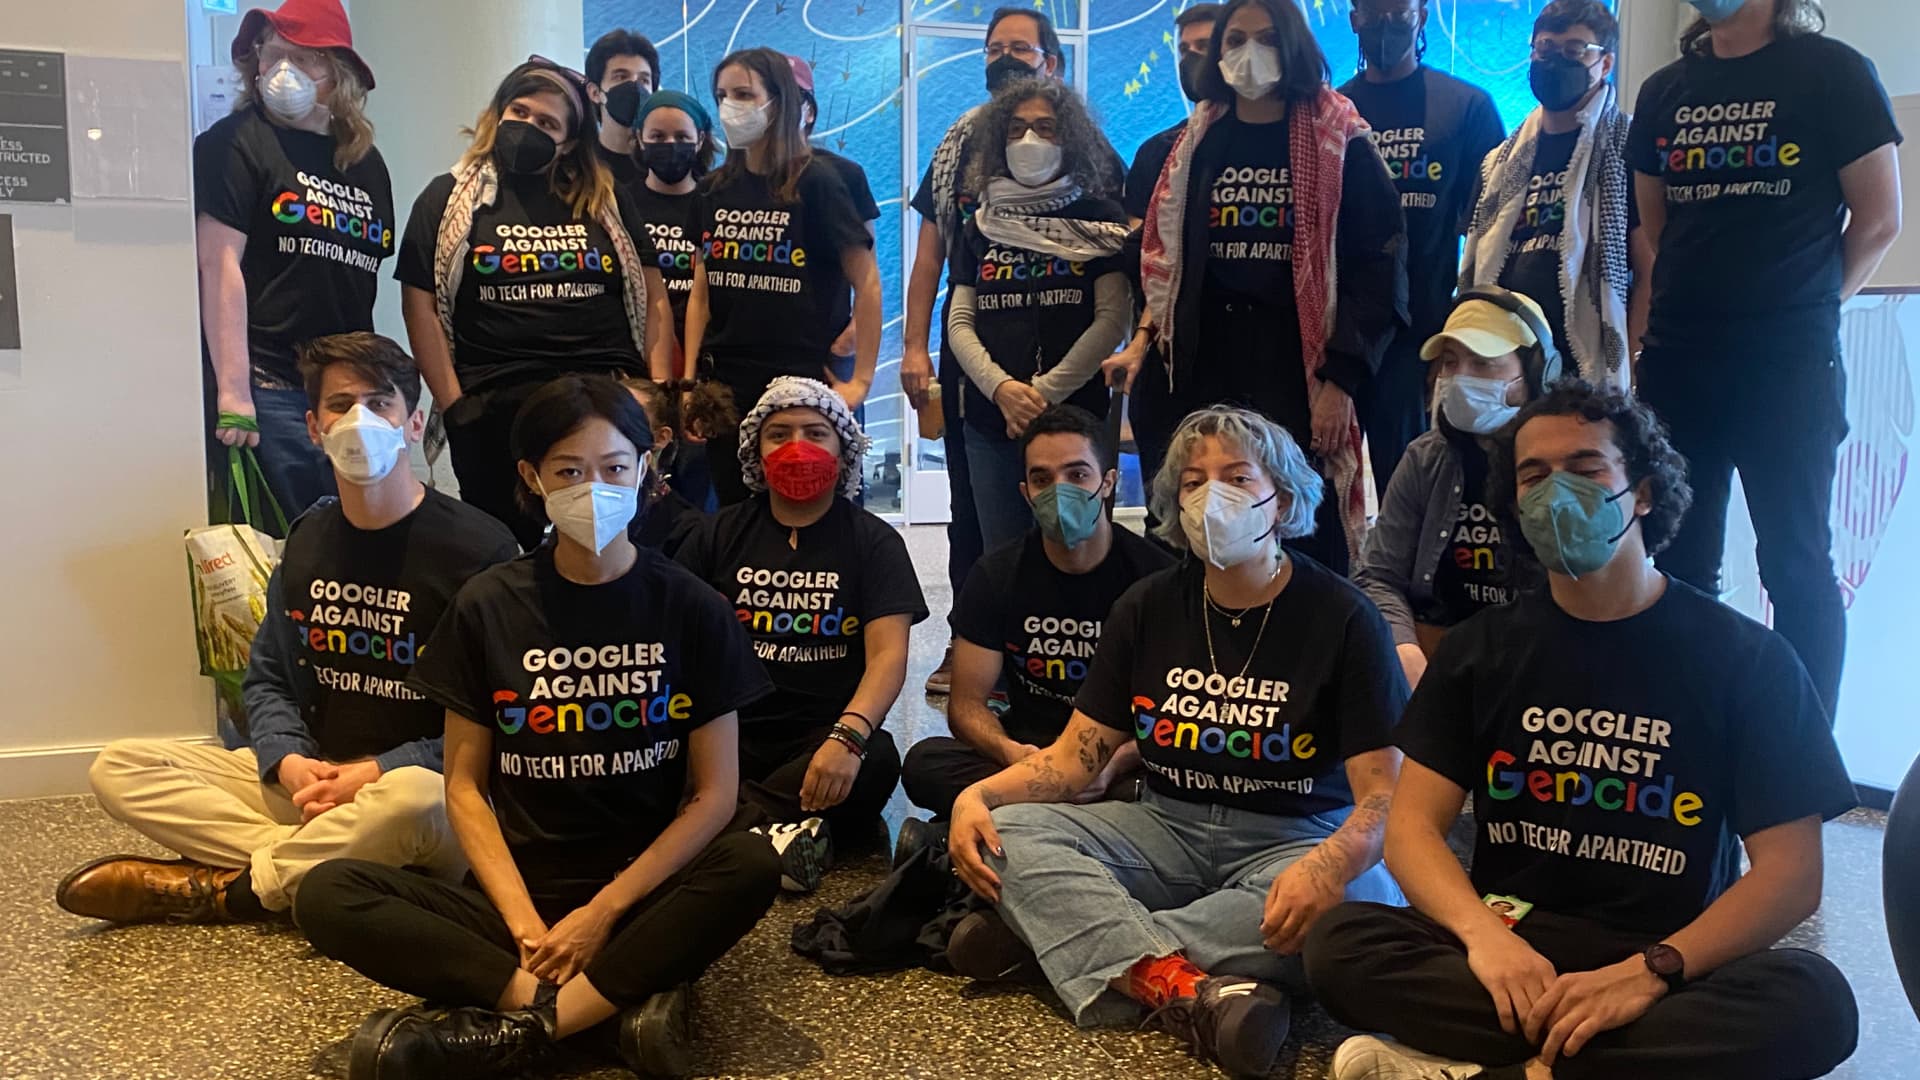 Google personnel arrested immediately after 9-hour protest in Google Cloud CEO’s office environment